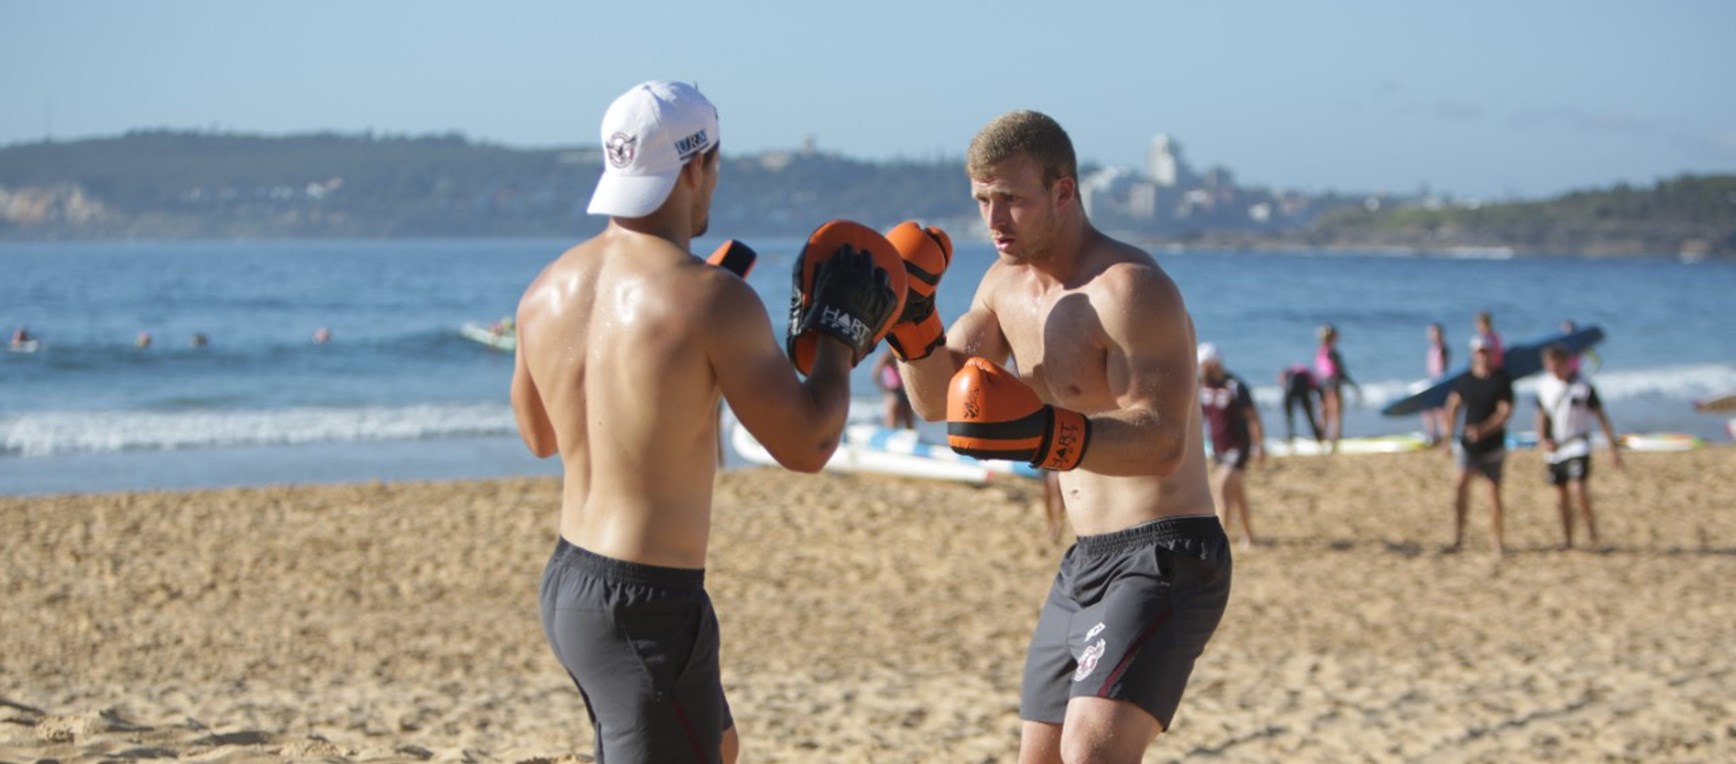 Gallery | Beach Boxing Session